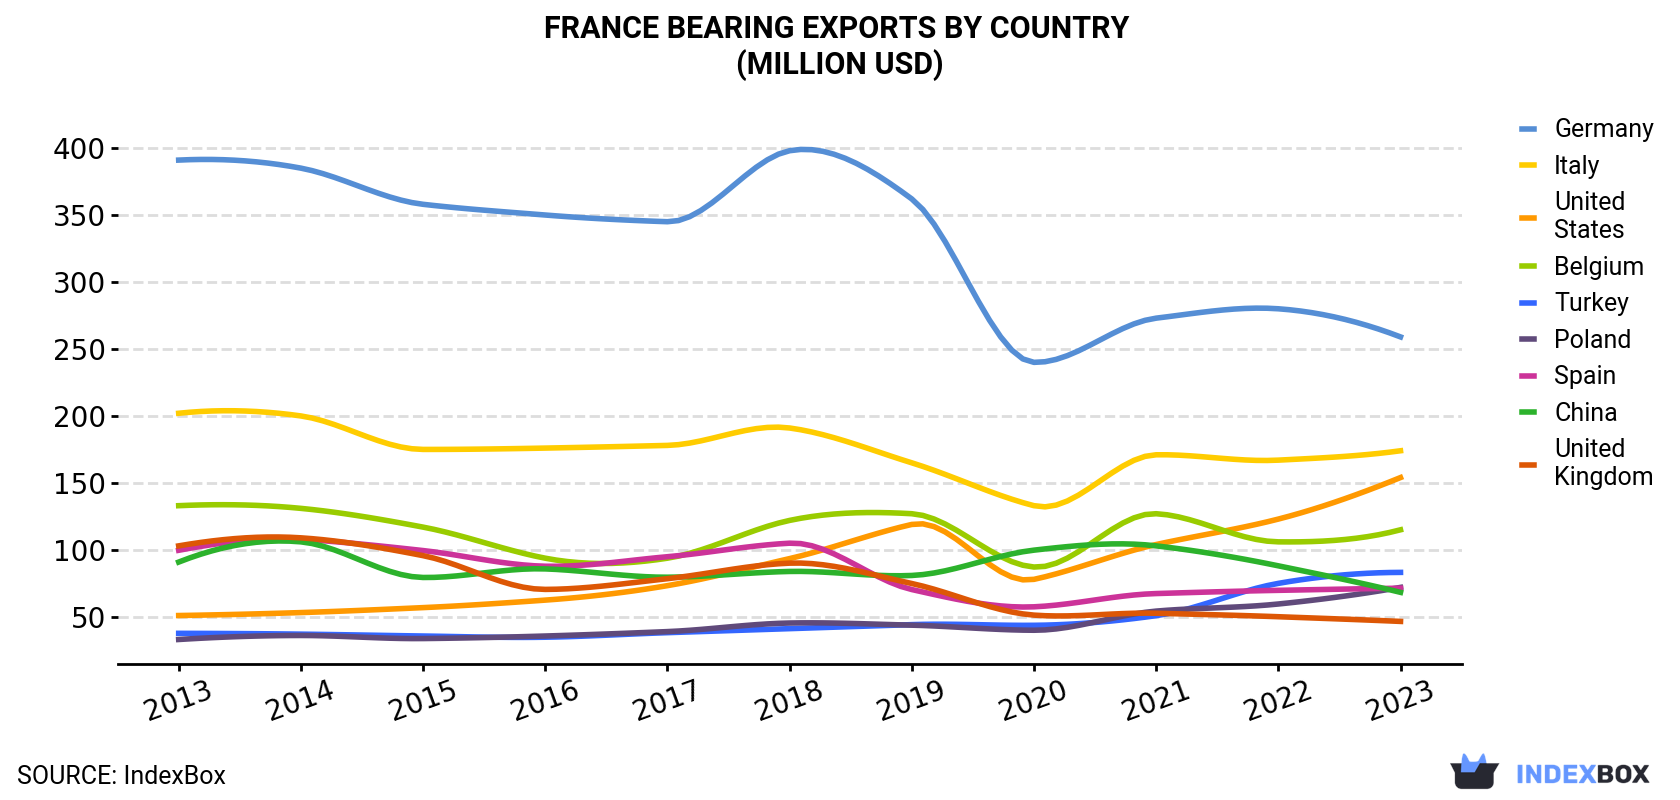 France Bearing Exports By Country (Million USD)